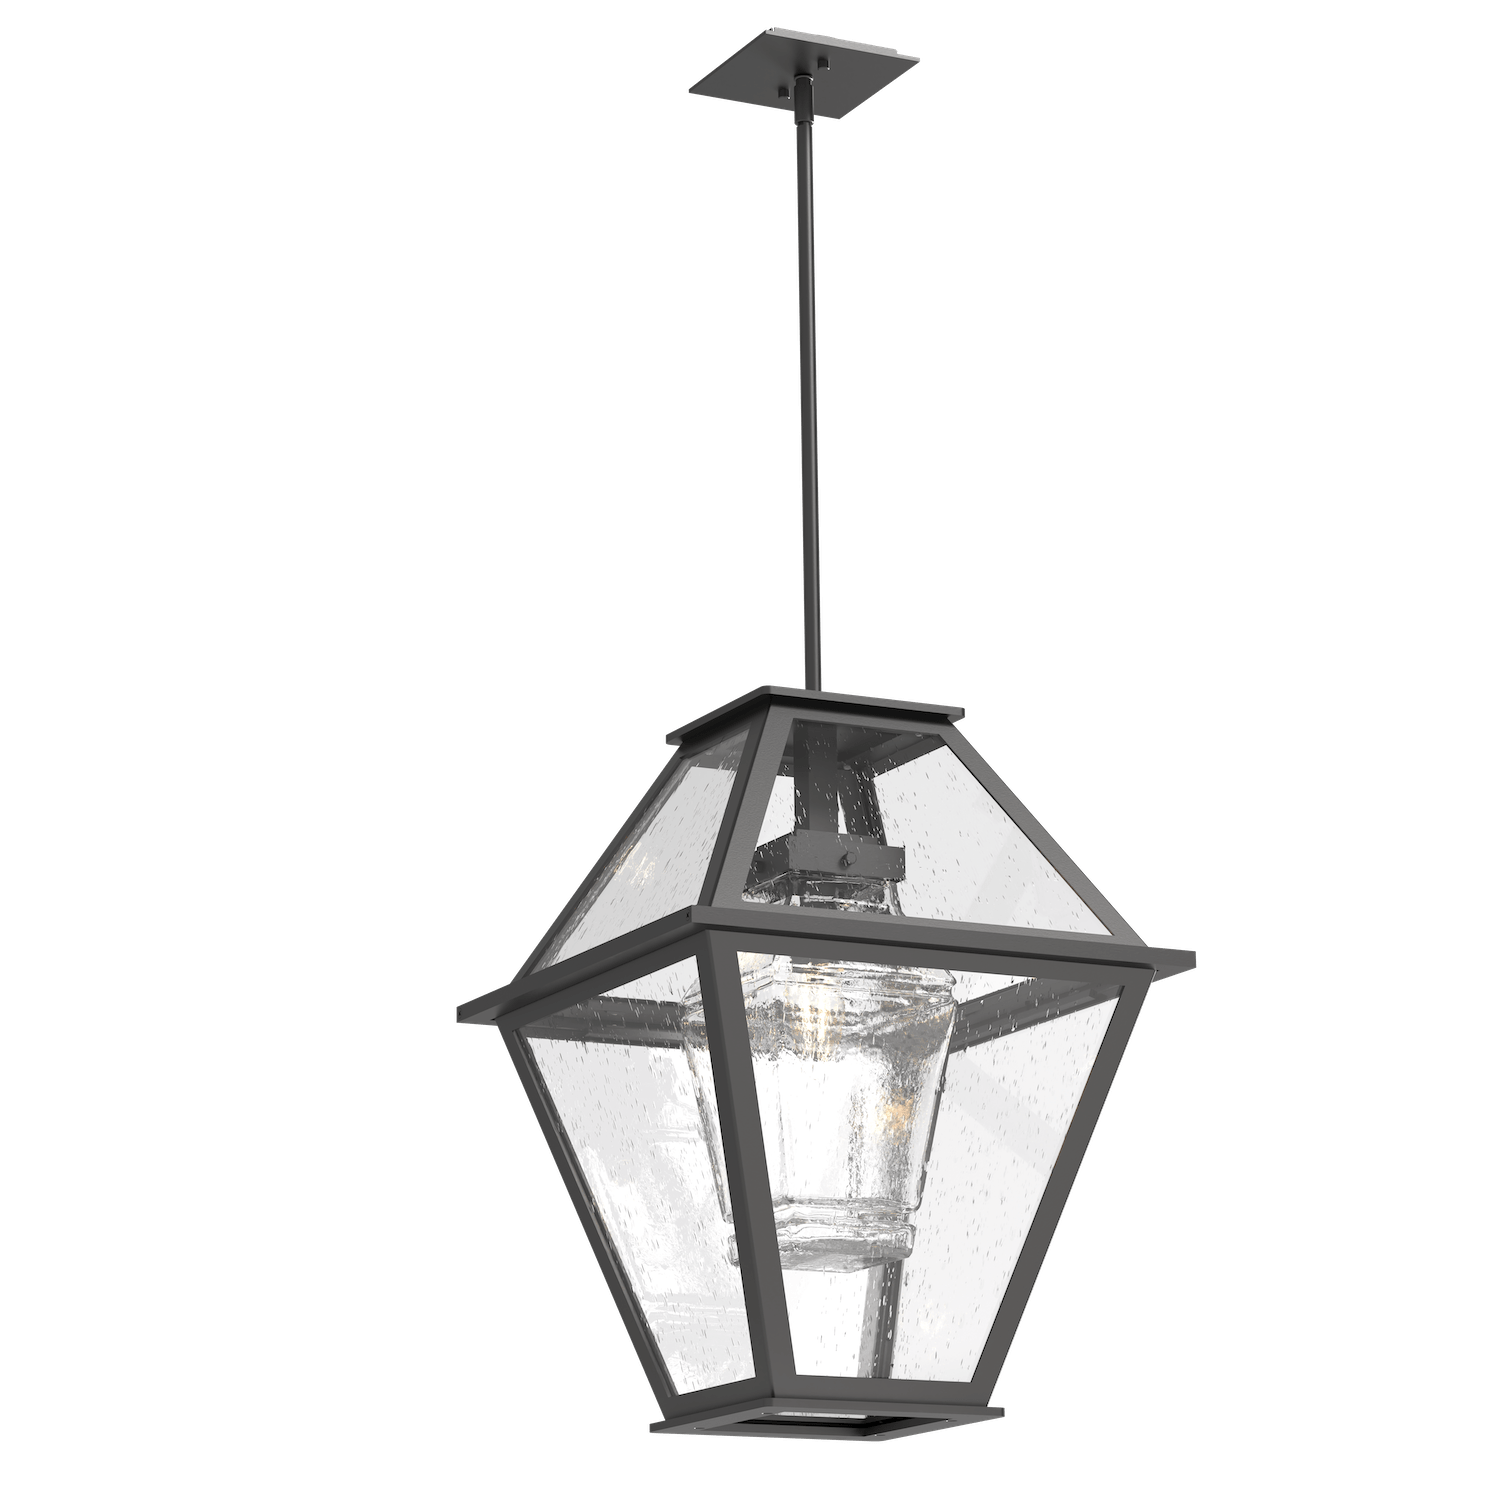 OPB0072-01-AG-C-Hammerton-Studio-Terrace-24-inch-outdoor-nested-pendant-light-with-argento-grey-finish-and-clear-blown-glass-shades-and-incandescent-lamping